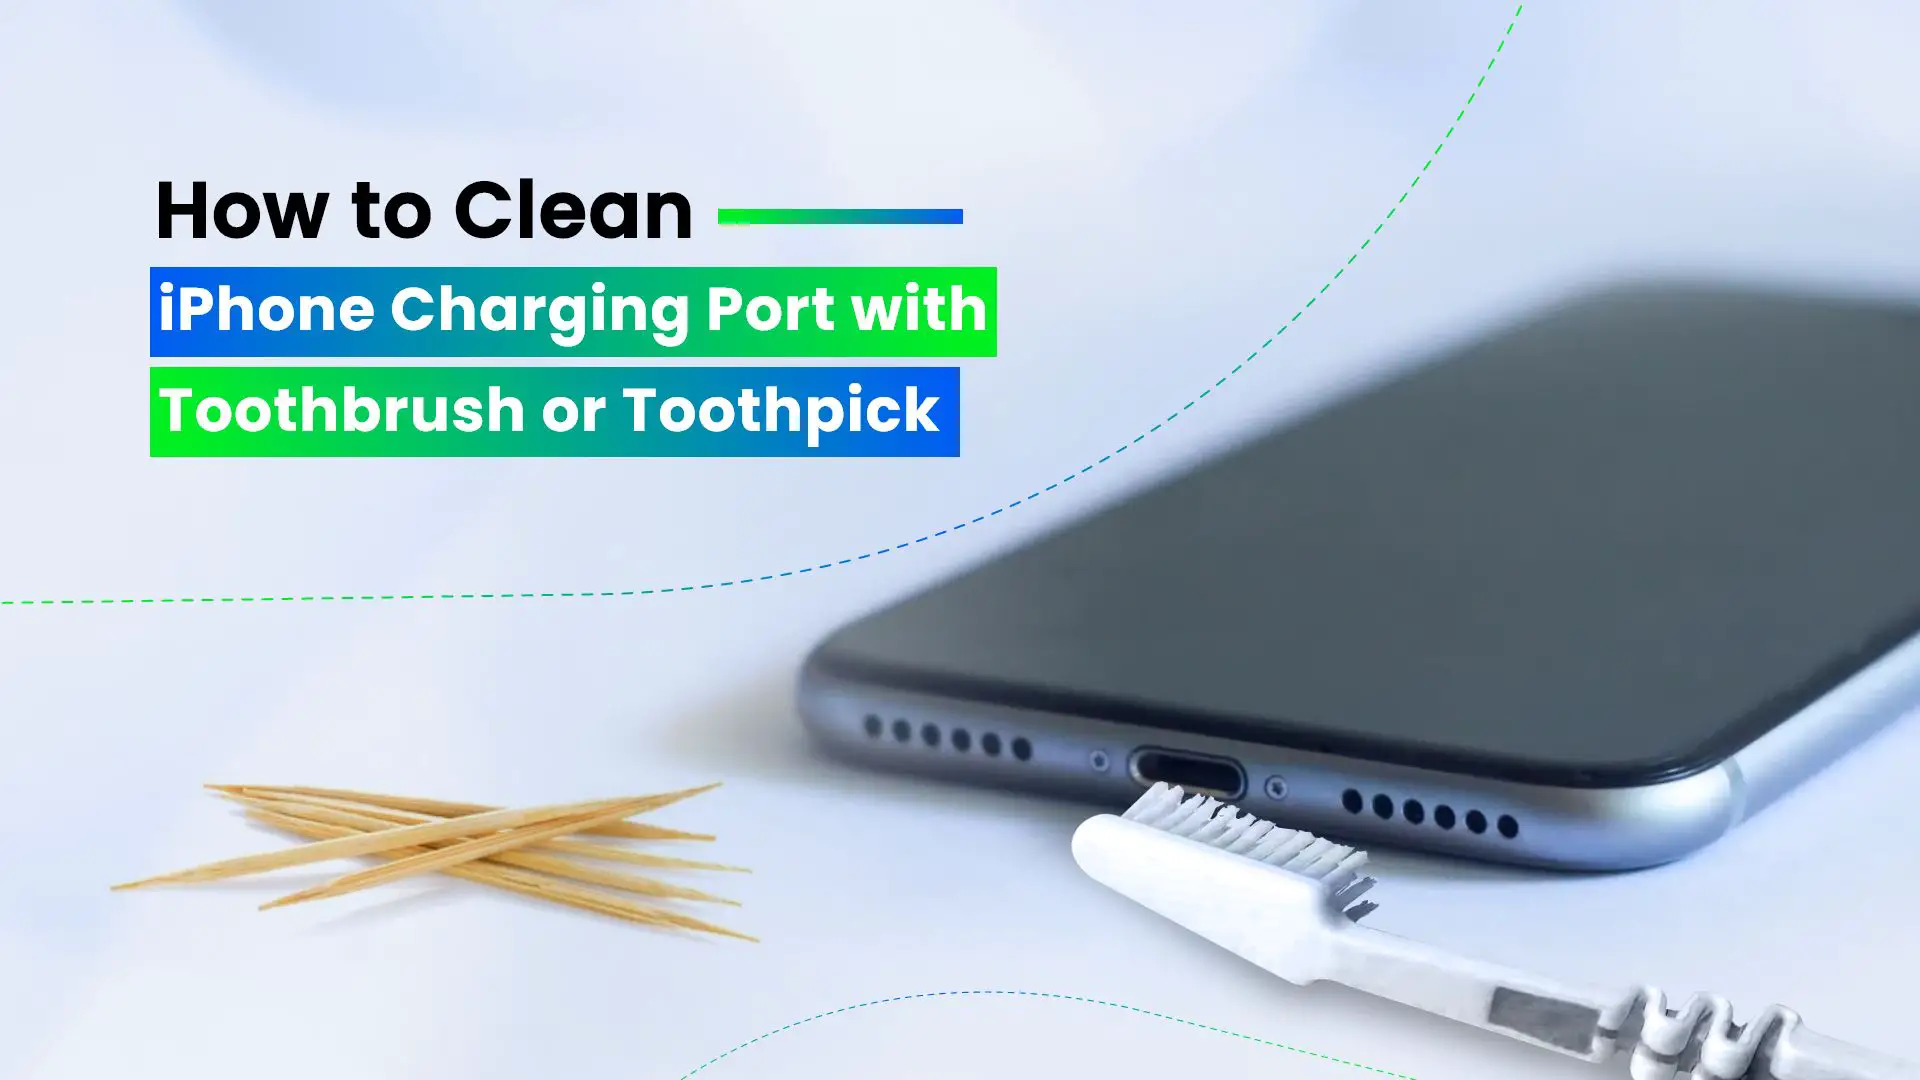 How to Clean iPhone Charging Port with Toothbrush or Toothpick